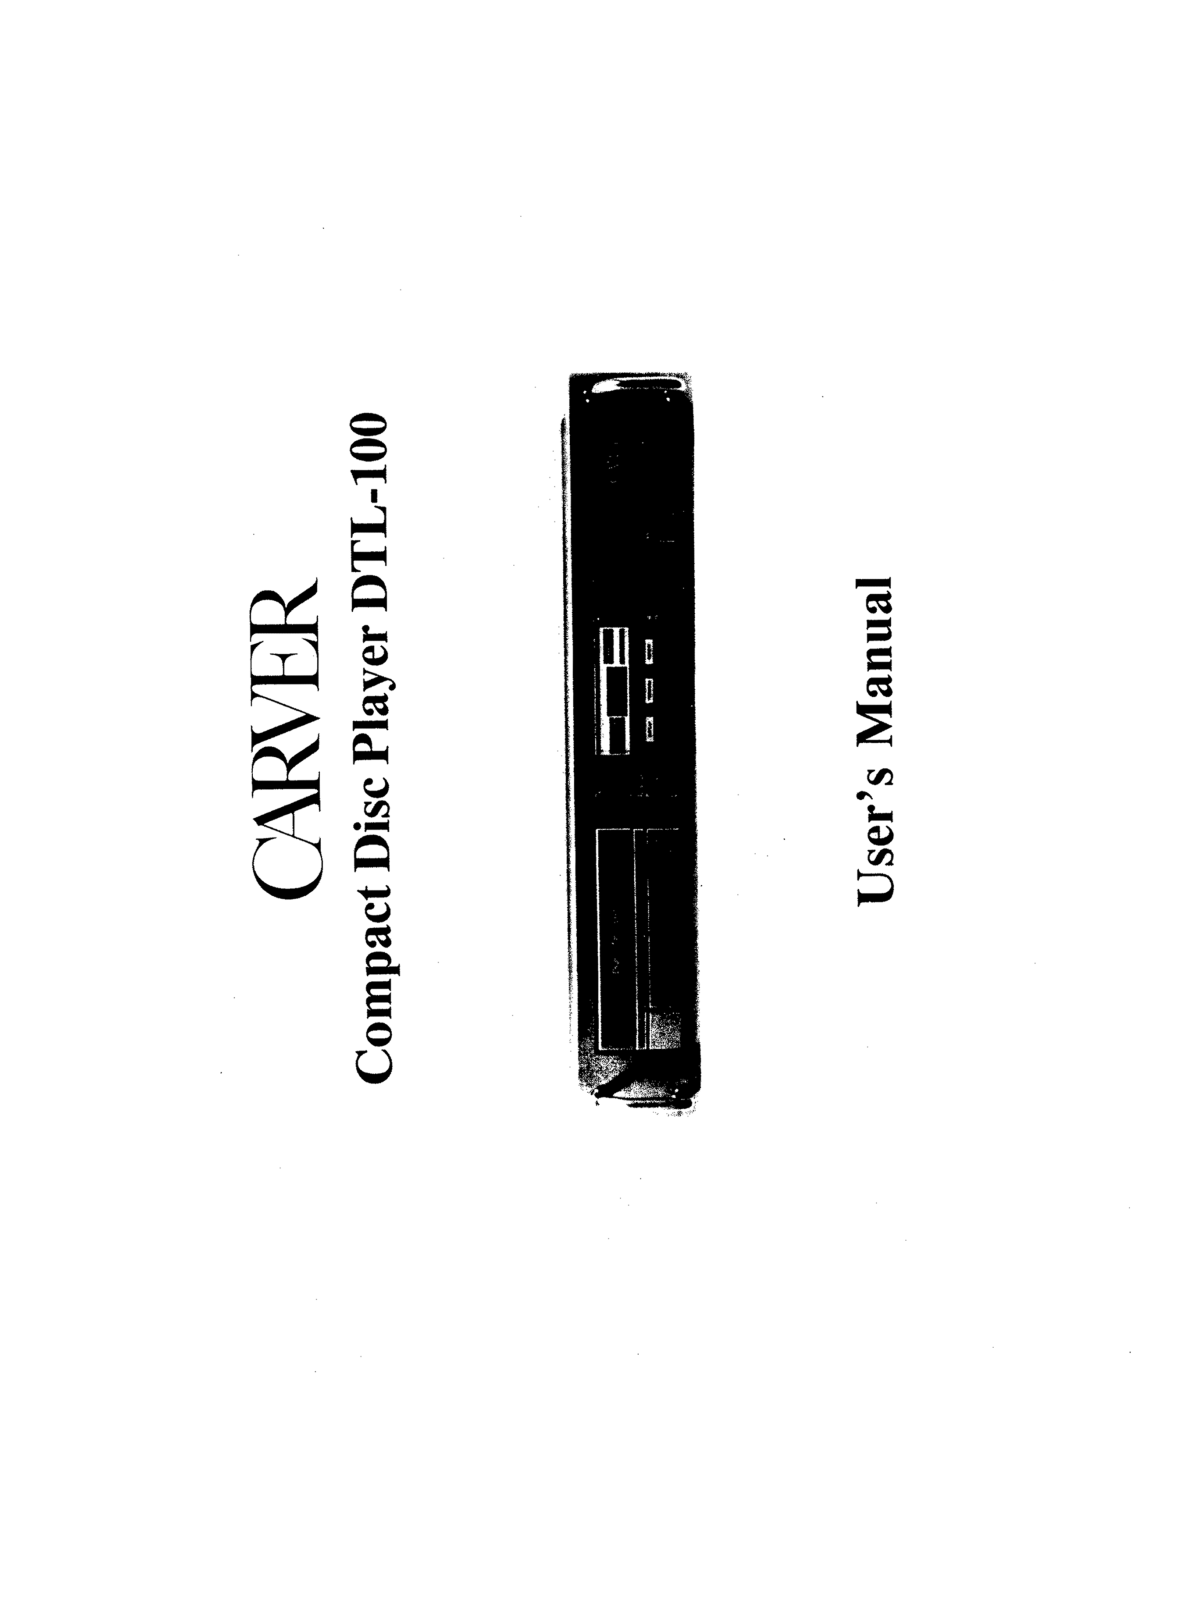 Carver DTL-100 Owners manual